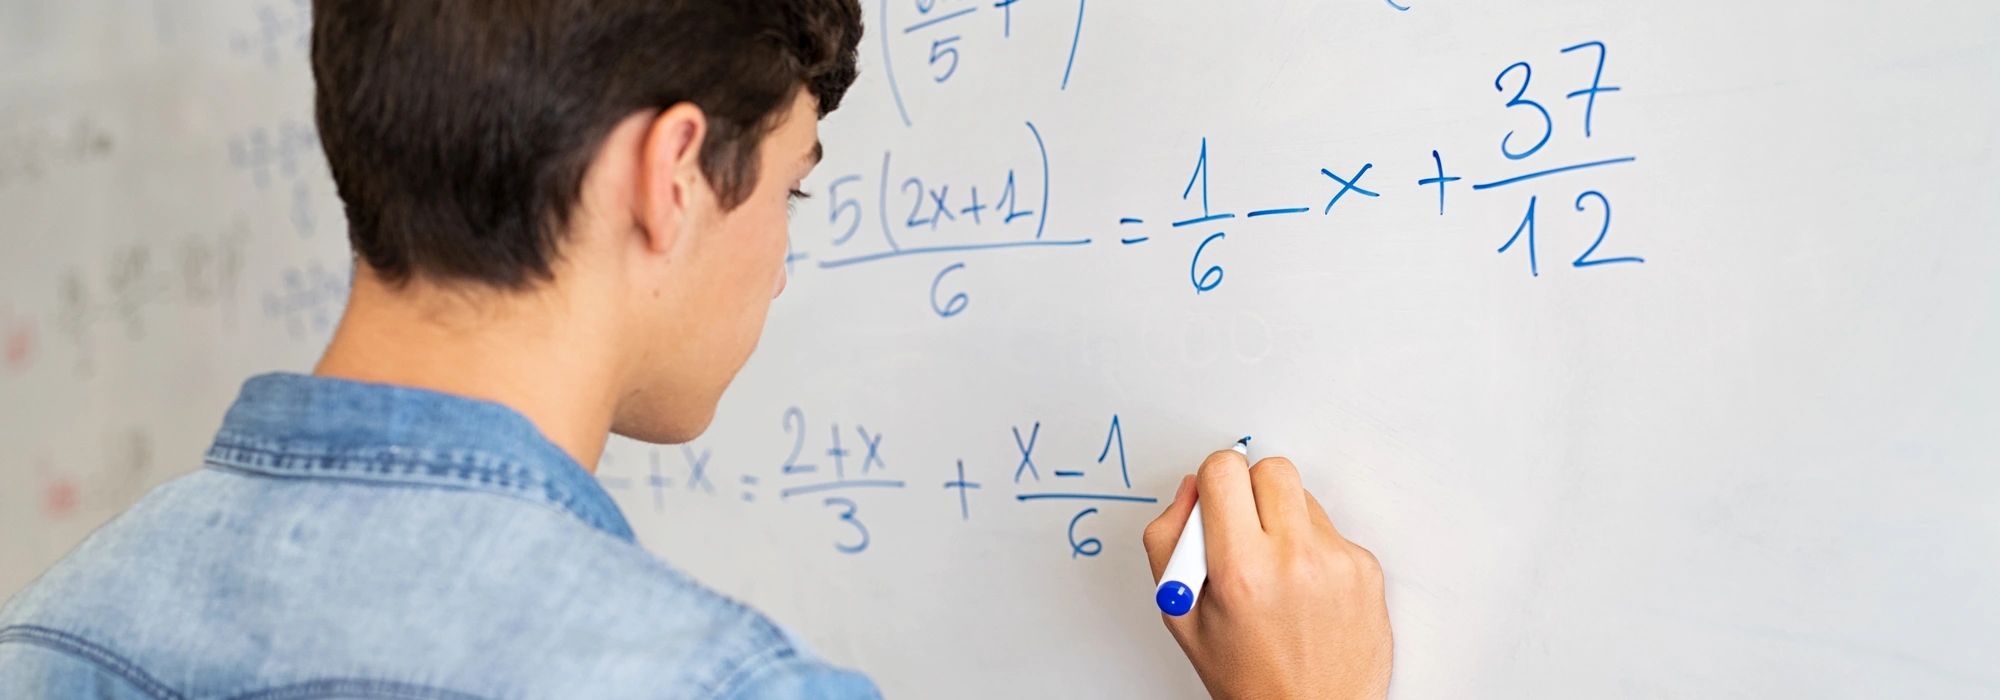 Mastering Math: 5 Math Tips from Tutoring Experts